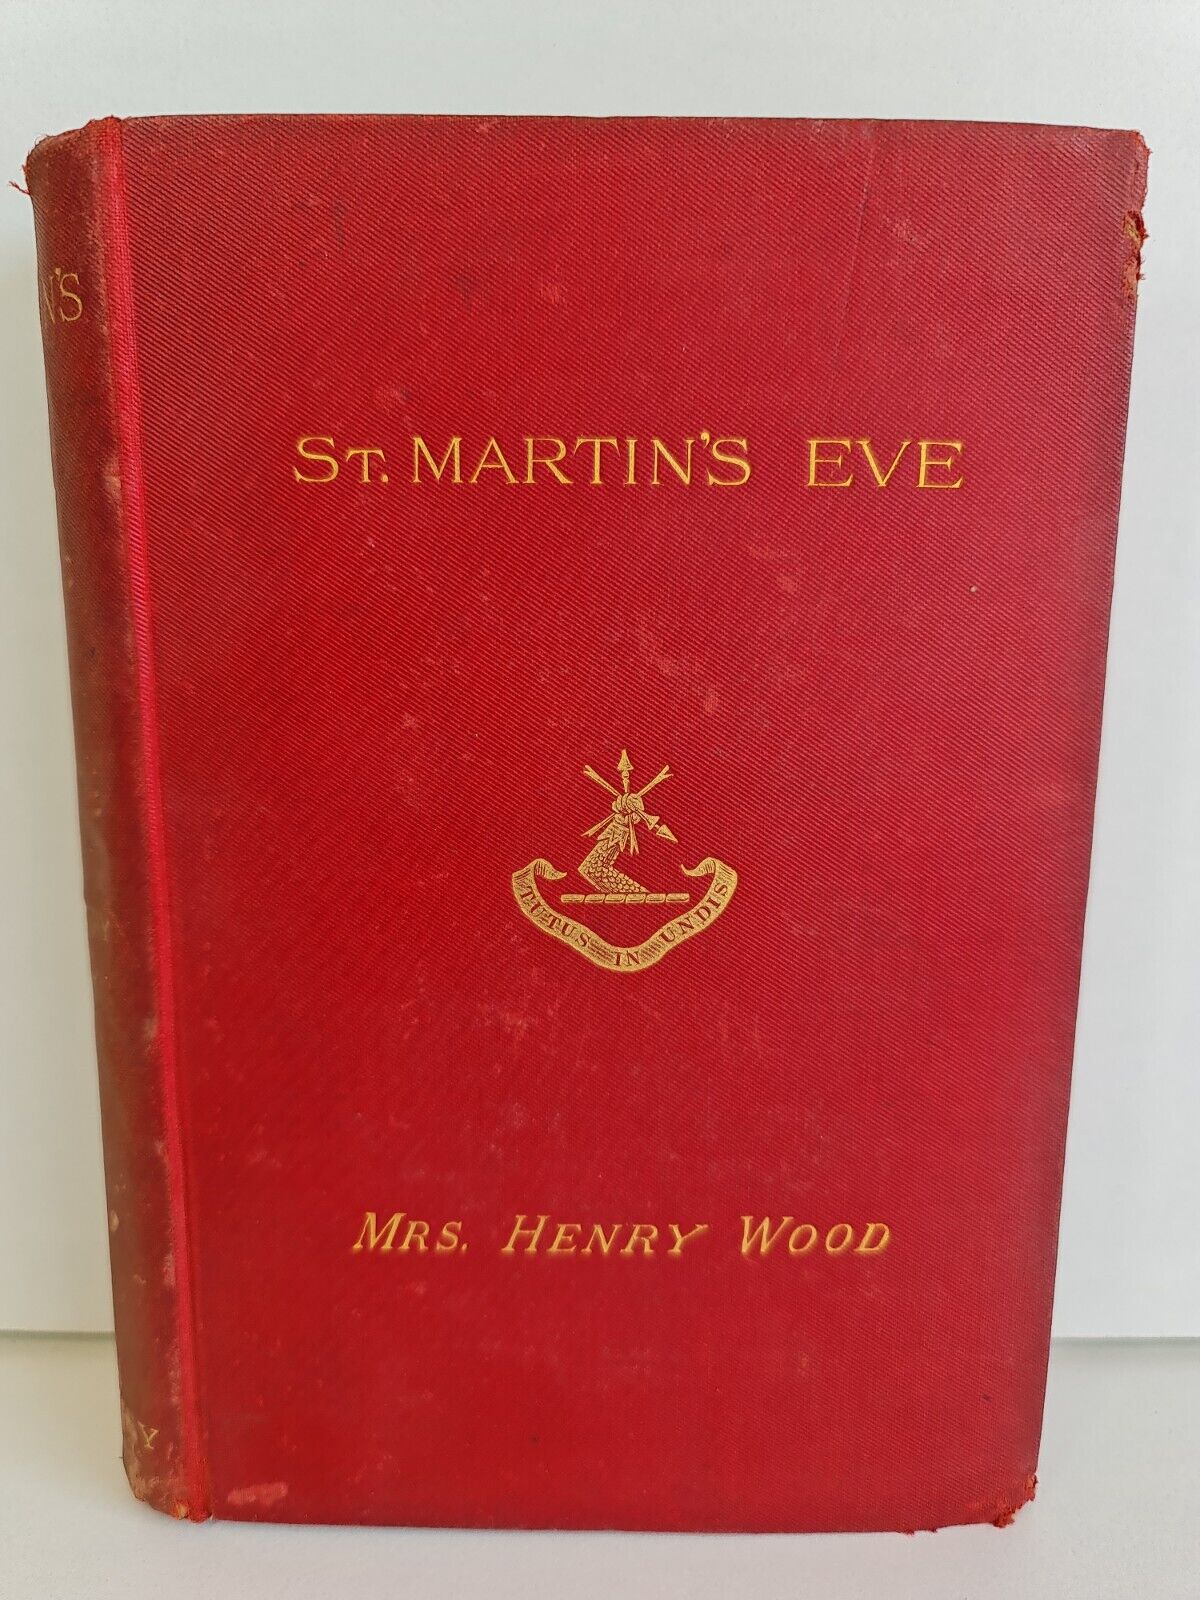 St. Martin's Eve by Mrs Henry Wood (1888)